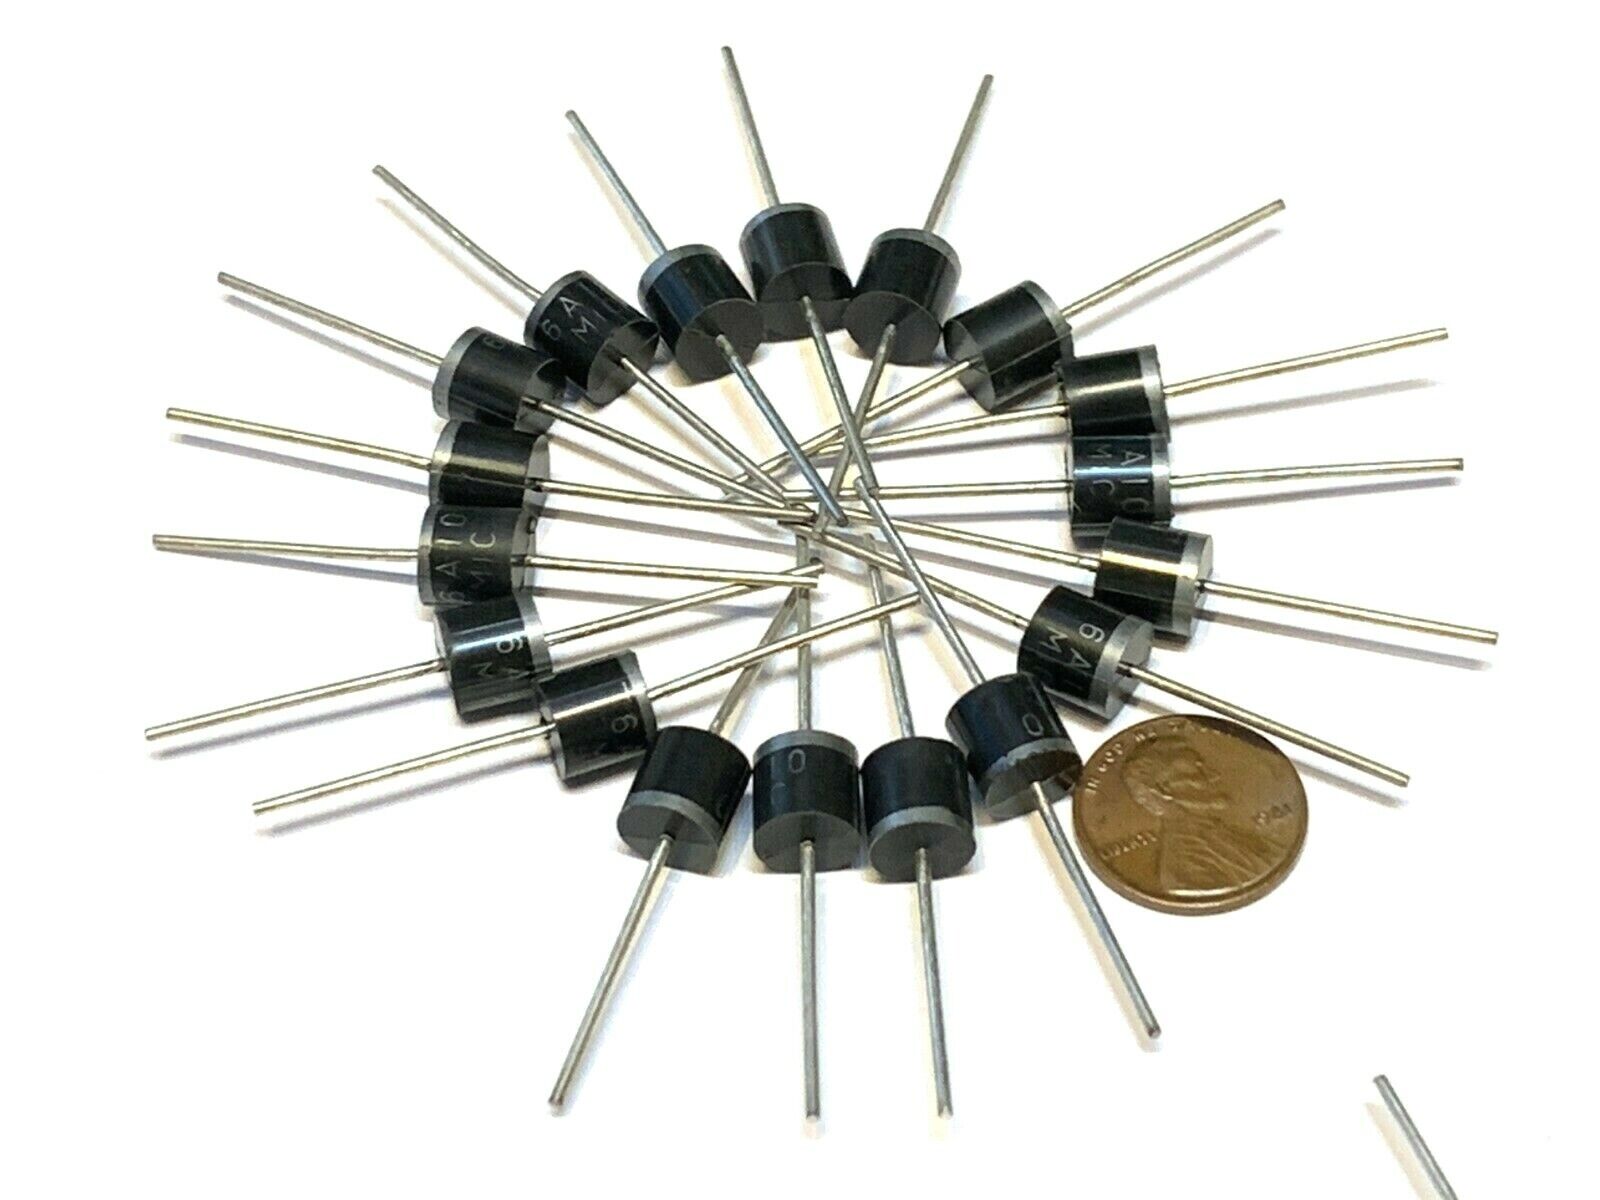 20 Pieces Switching Schottky Rectifier Diode 1000v 6a 20pcs 6 amp axial 1kv B13